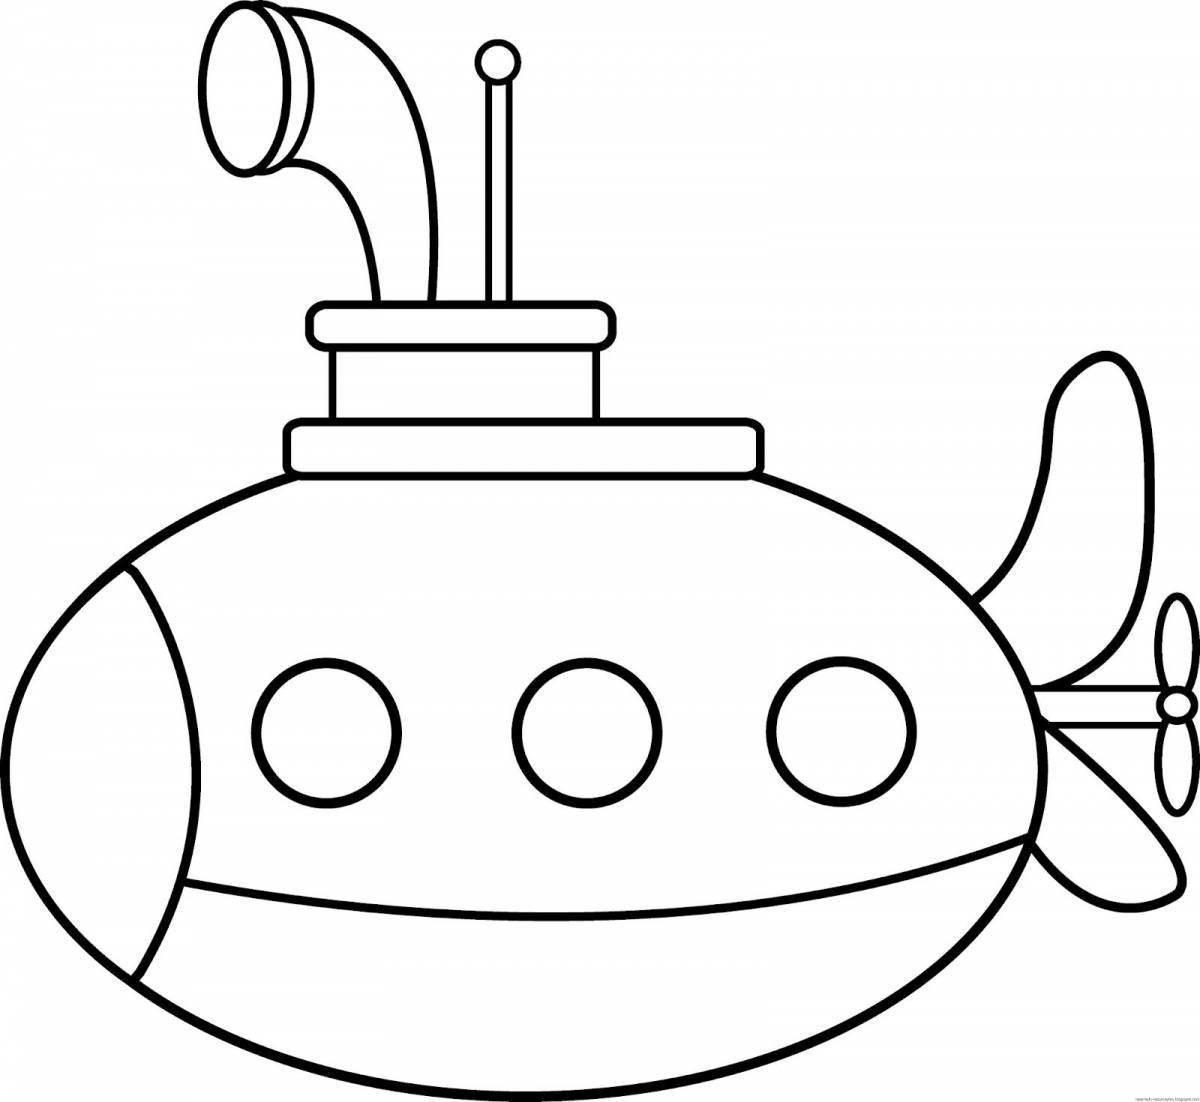 Incredible submarine coloring book for kids